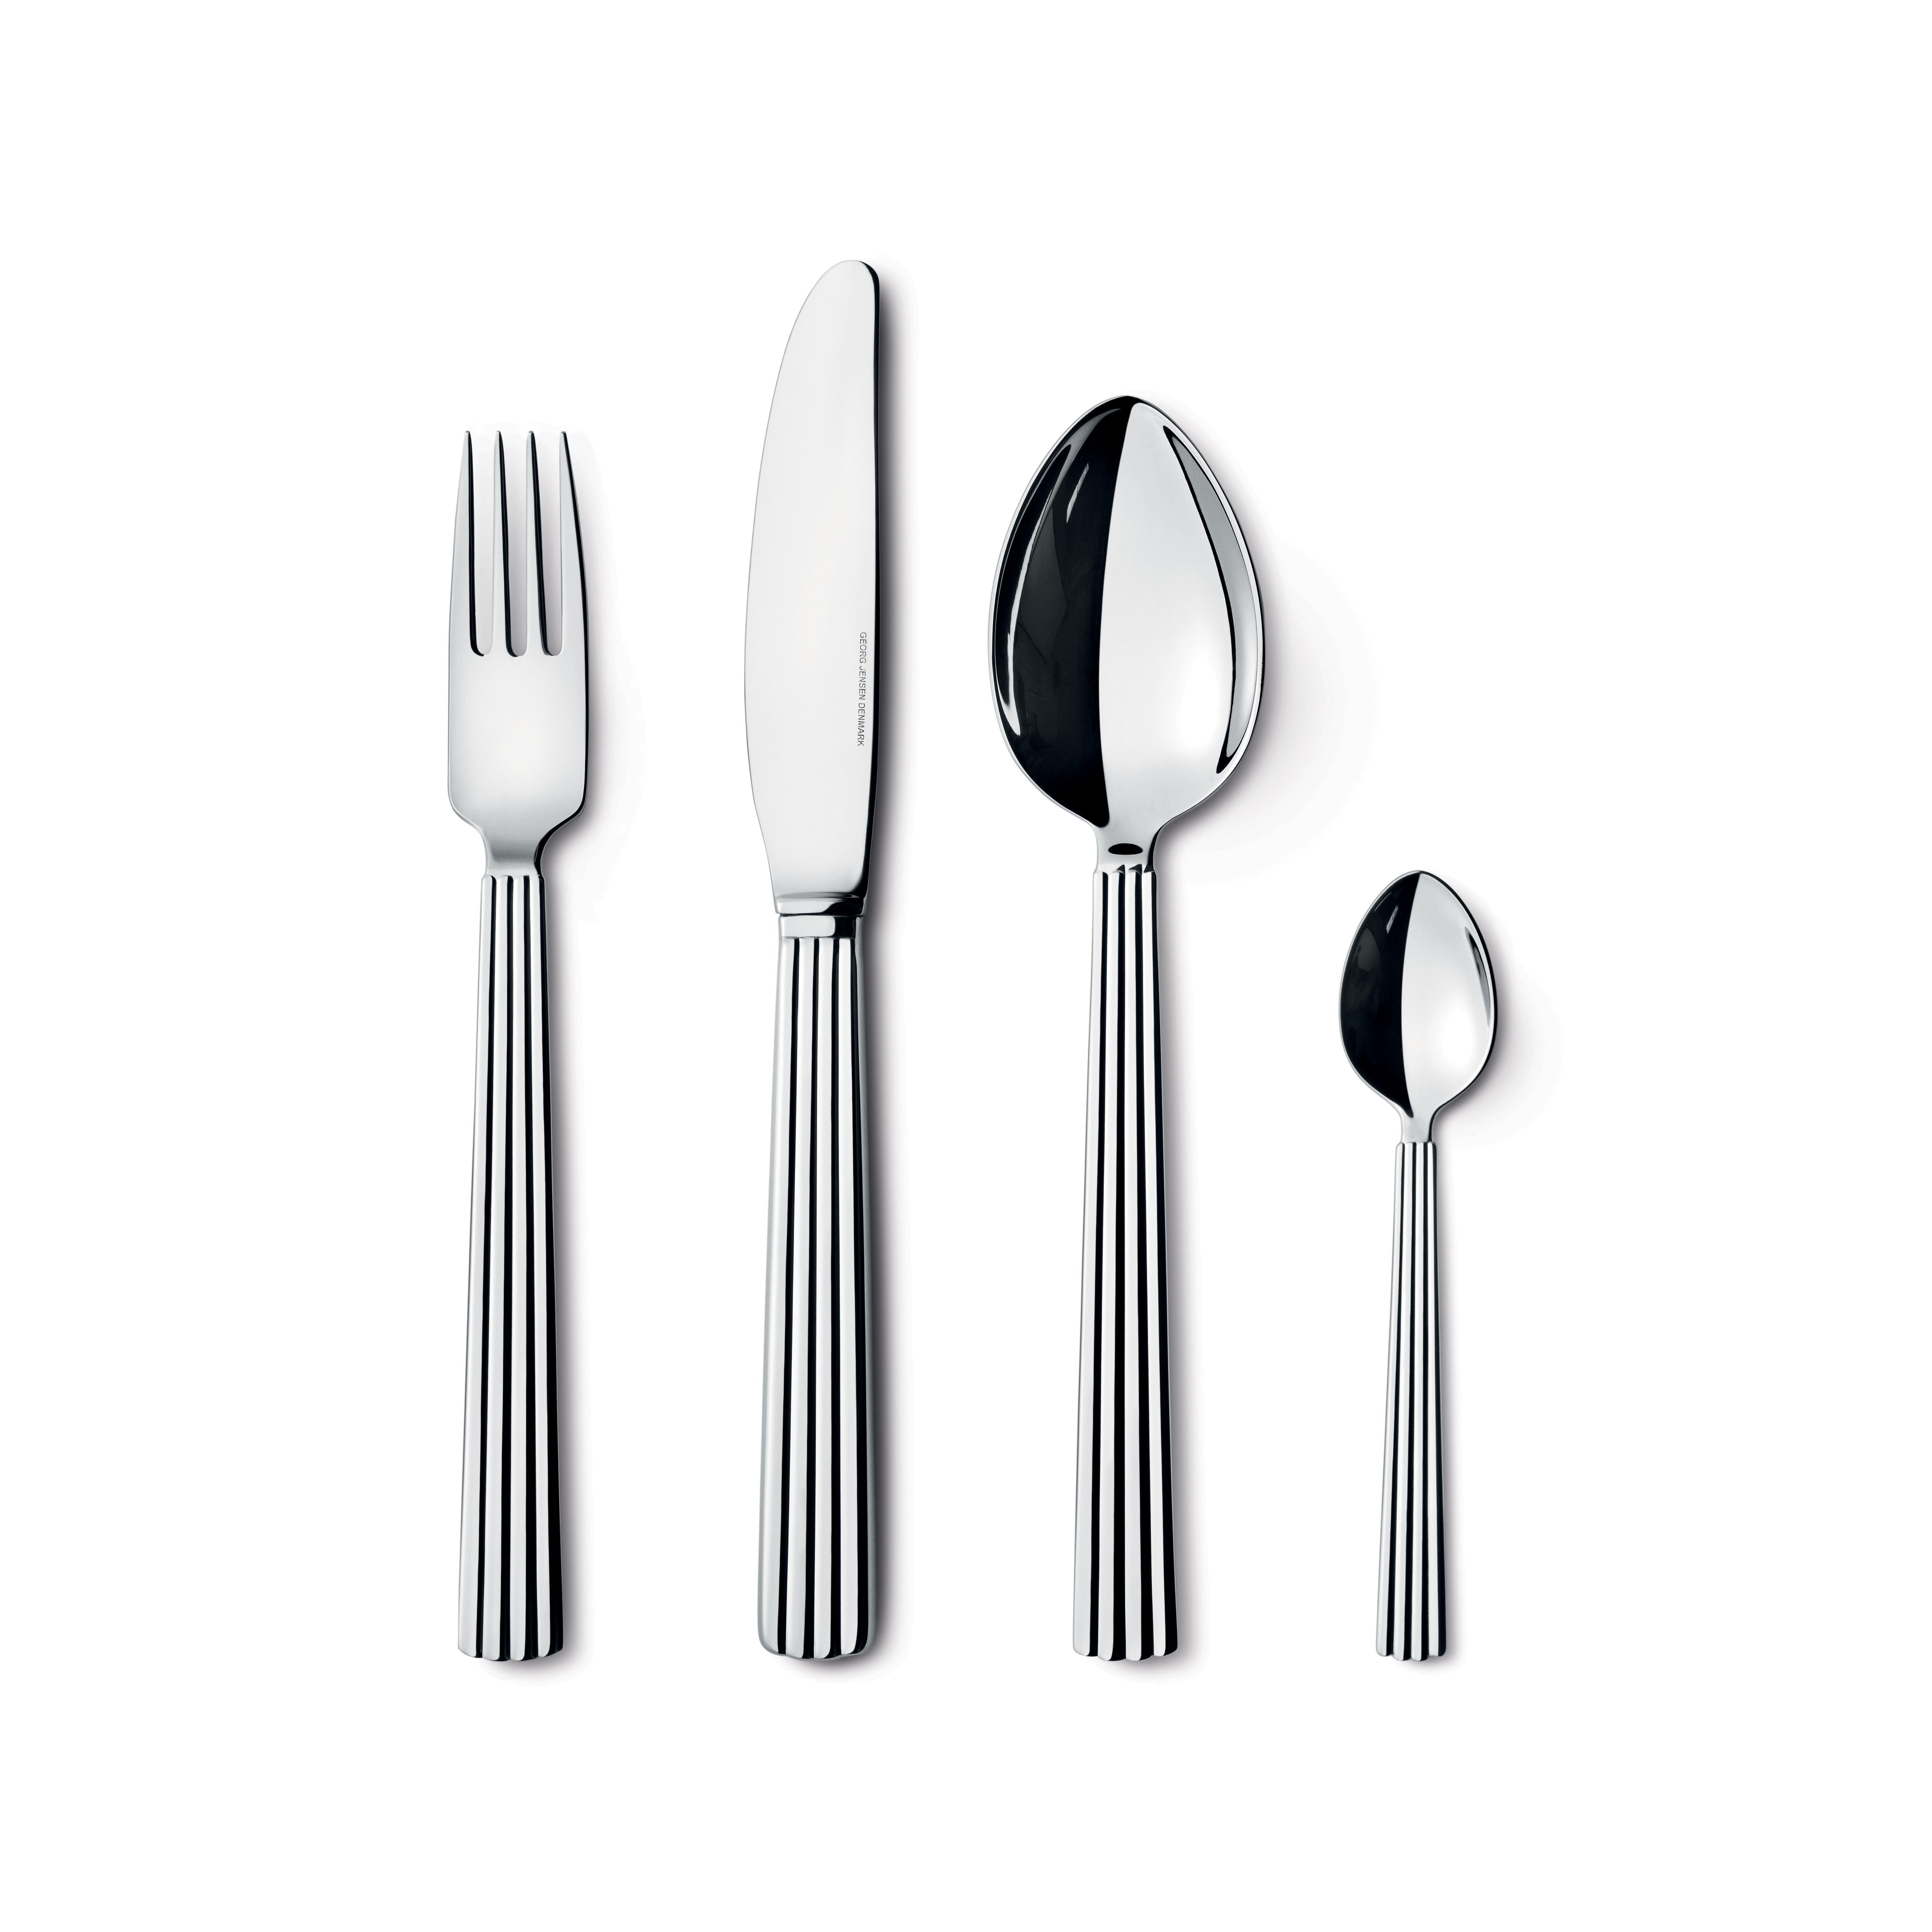 Stainless steel mirror cutlery giftbox with a dinner spoon, dinner fork, long grill knife and teaspoon. Classic Scandinavian design at its most elegant and refined, Bernadotte stands the test of time. This beautifully crafted silver and stainless